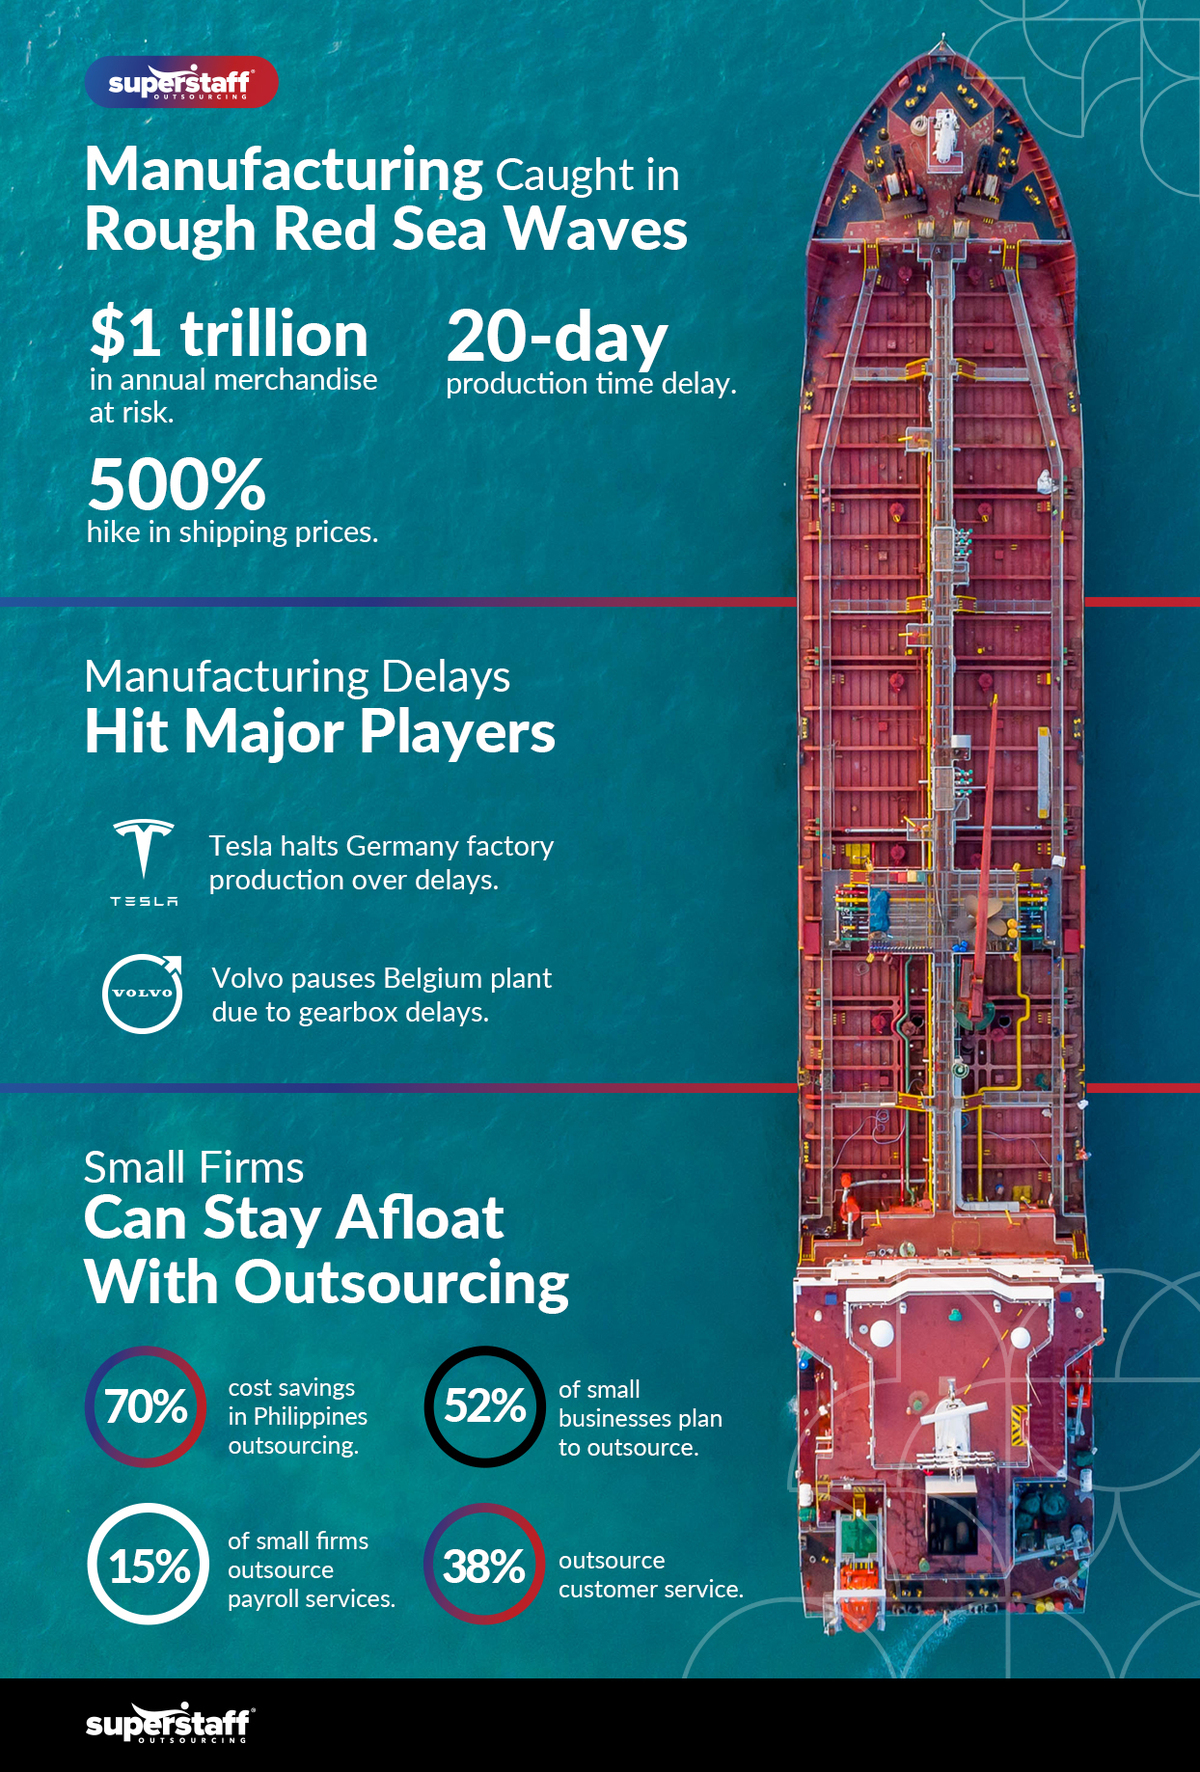 An infographic shows a cargo ship sailing the Red Sea.